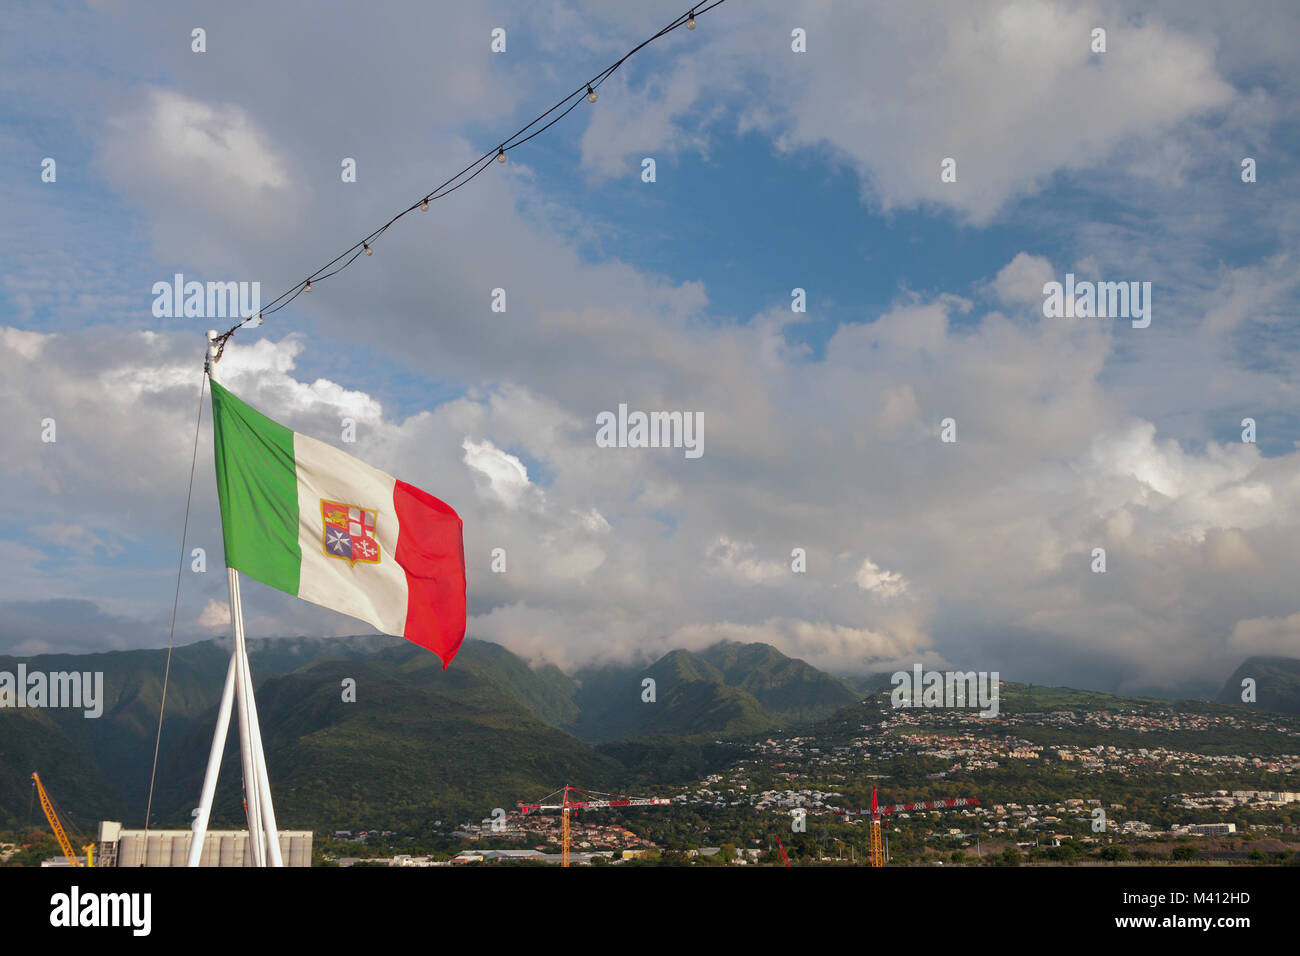 Italian flag with Maltese symbolics against background of hilly terrain. Boeuf-mort, Reunion Stock Photo